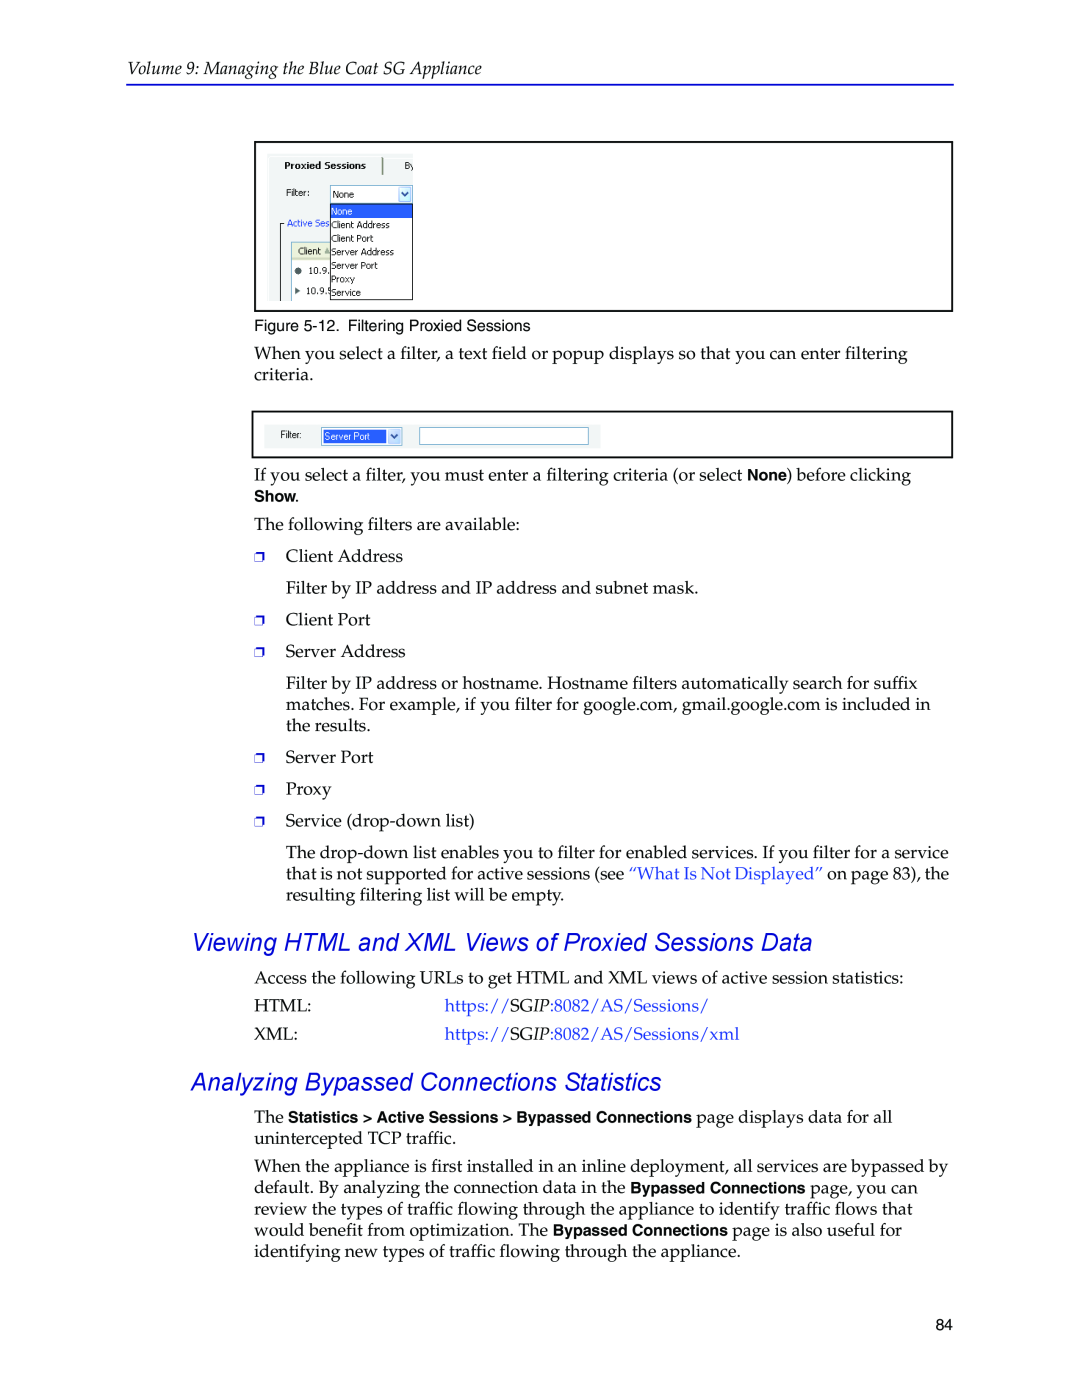 Blue Coat Systems SGOS Version 5.2.2, Blue Coat Systems SG Appliance manual Analyzing Bypassed Connections Statistics 